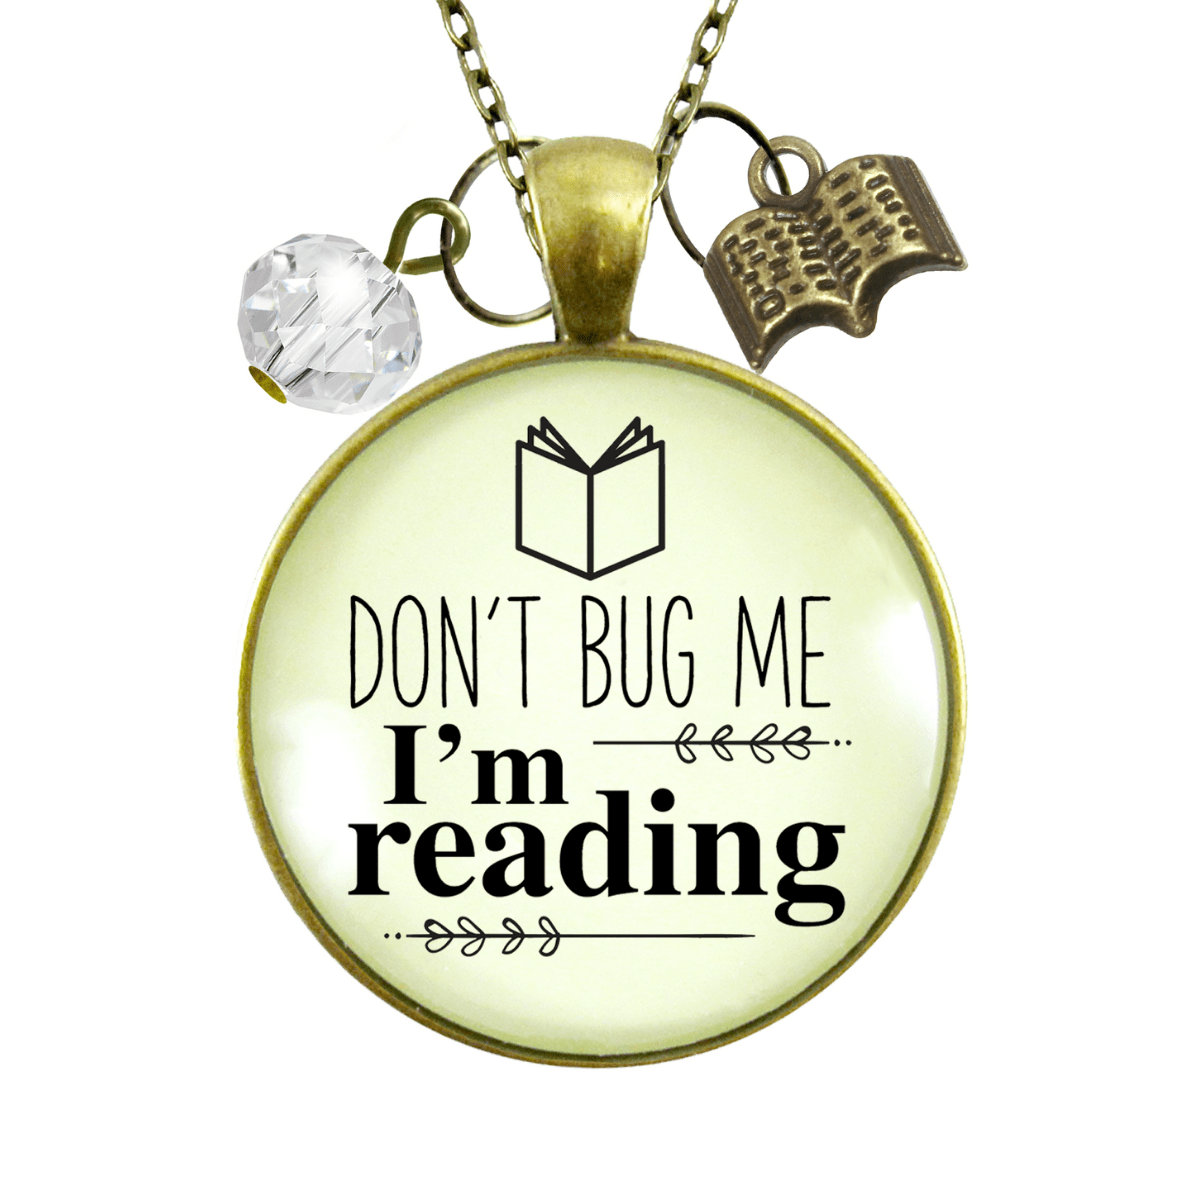 Gutsy Goodness Book Necklace Don't Bug Me I'm Reading Readers Author Jewelry Charm - Gutsy Goodness Handmade Jewelry;Book Necklace Don't Bug Me I'm Reading Readers Author Jewelry Charm - Gutsy Goodness Handmade Jewelry Gifts